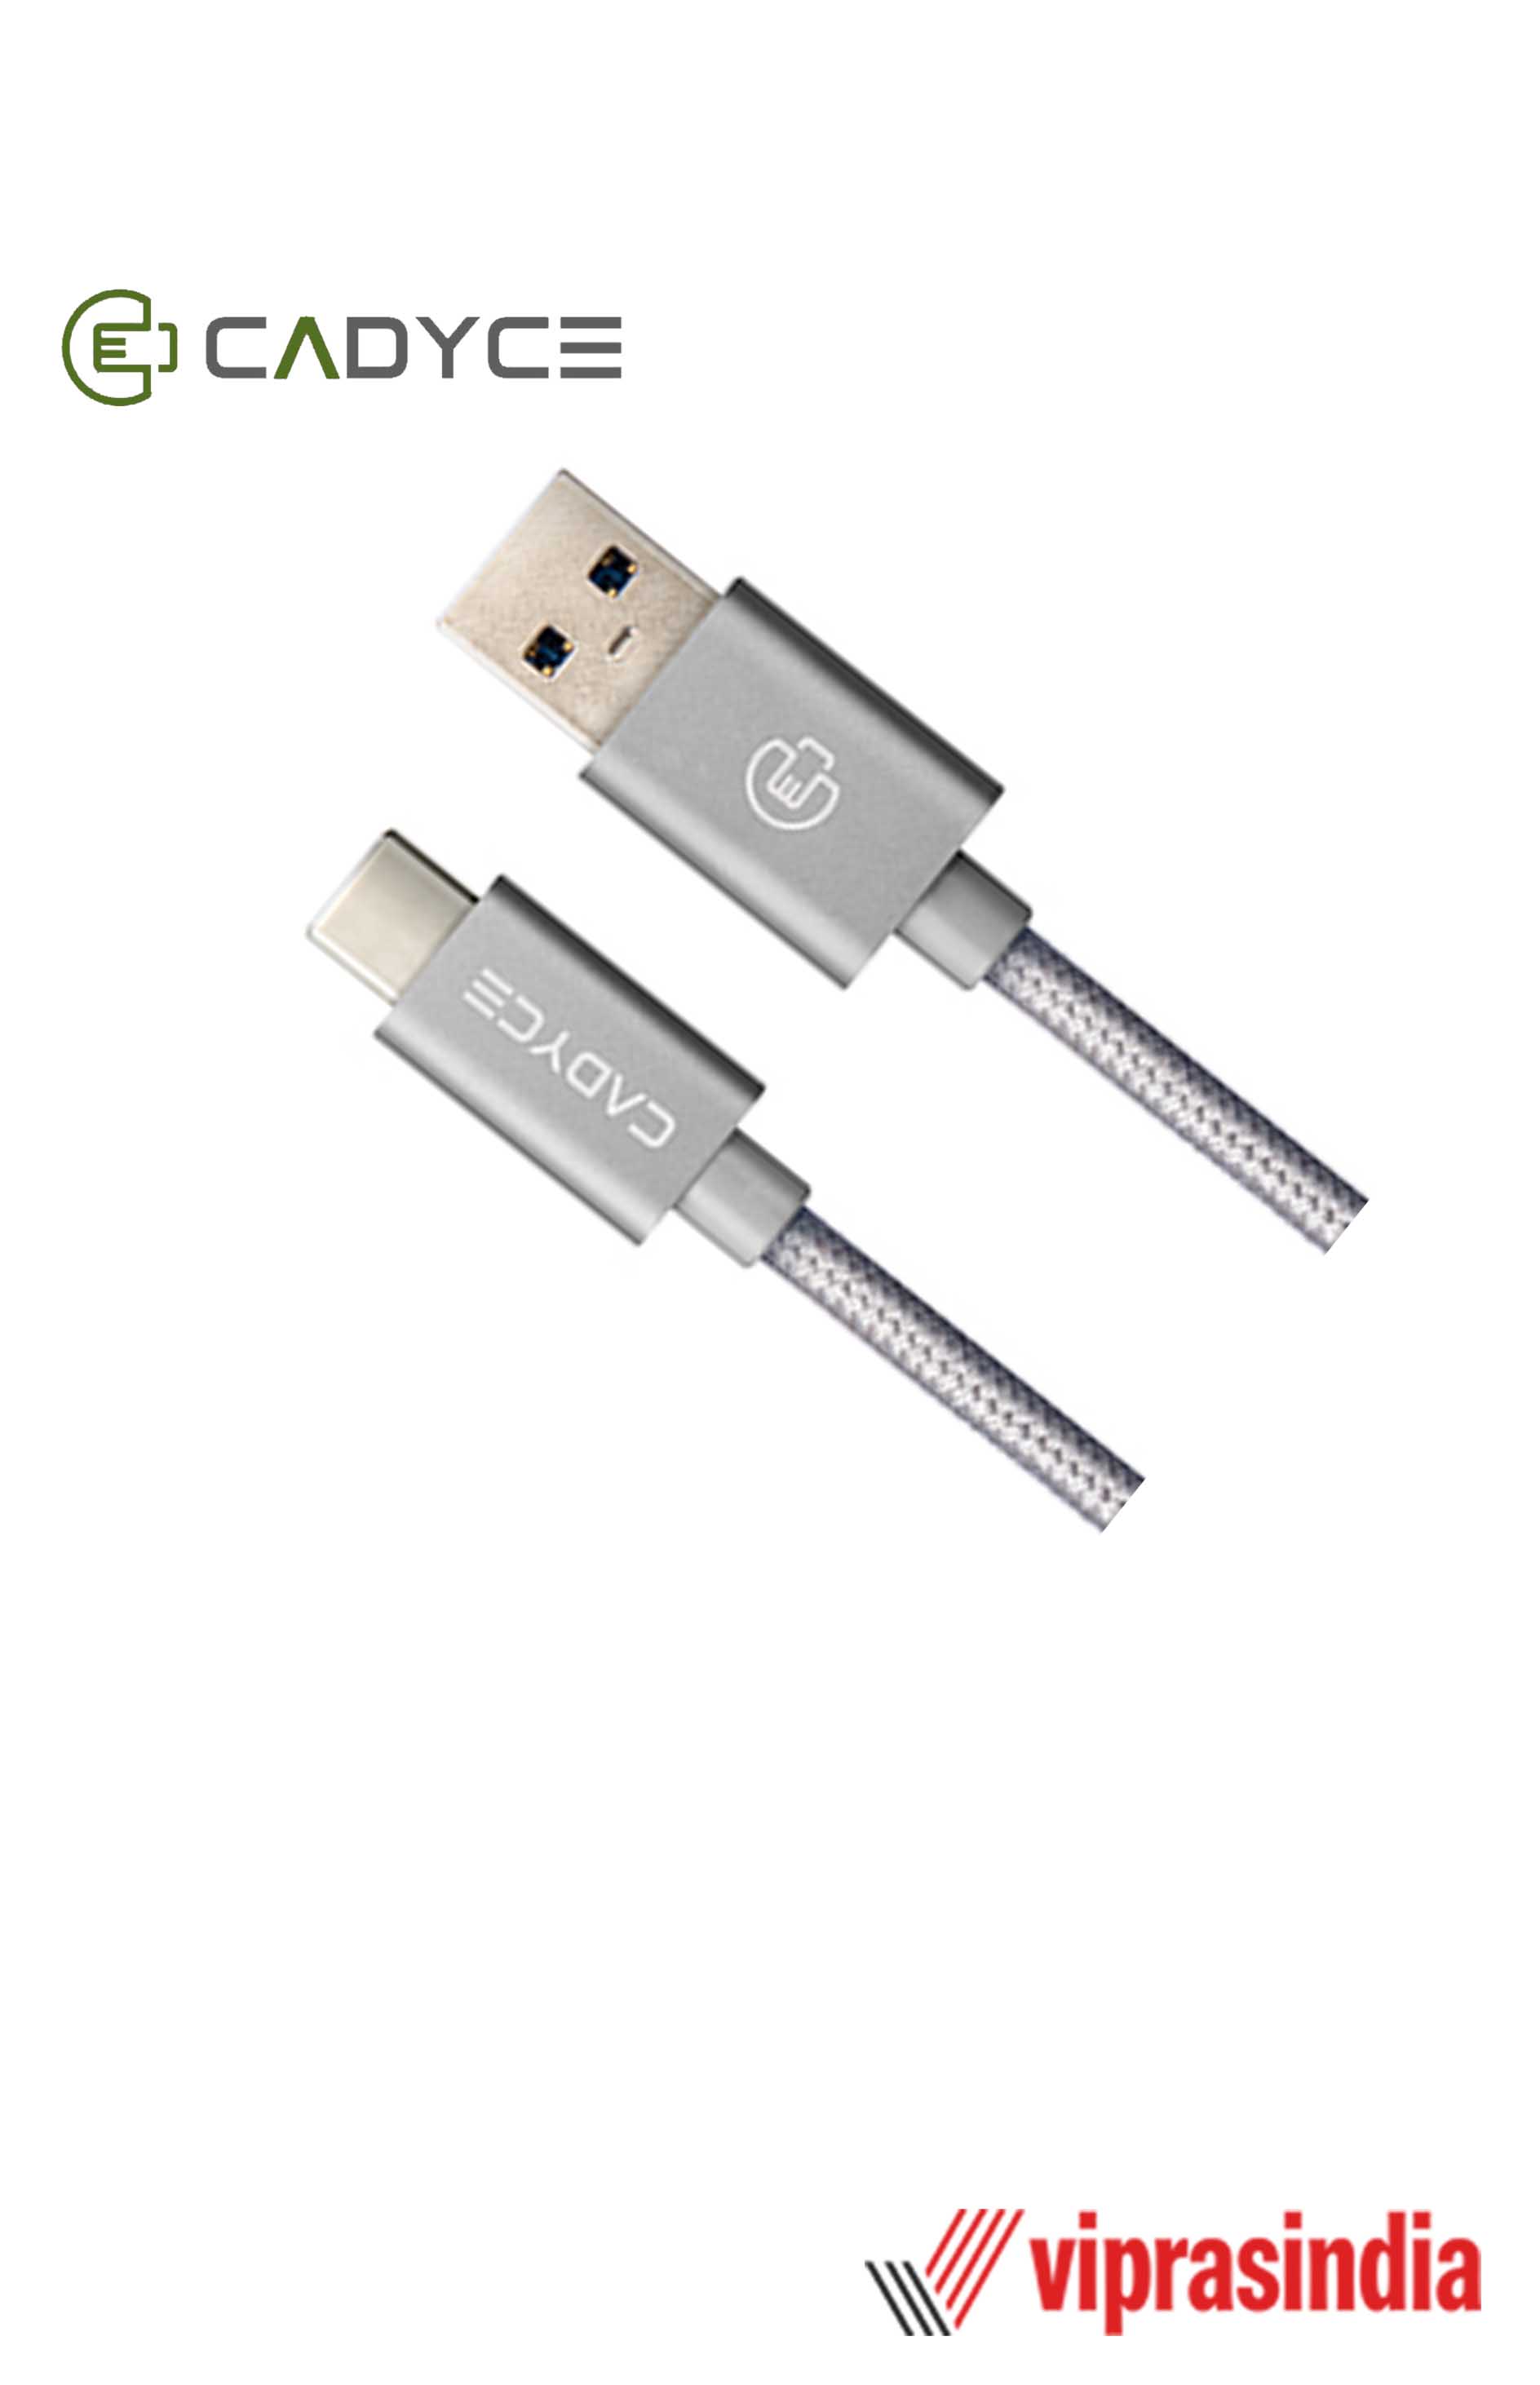 Cadyce CADMIUM Premium Braided USB-C to USB 3.0 A Type Male Cable CA-C3AM - Space gray